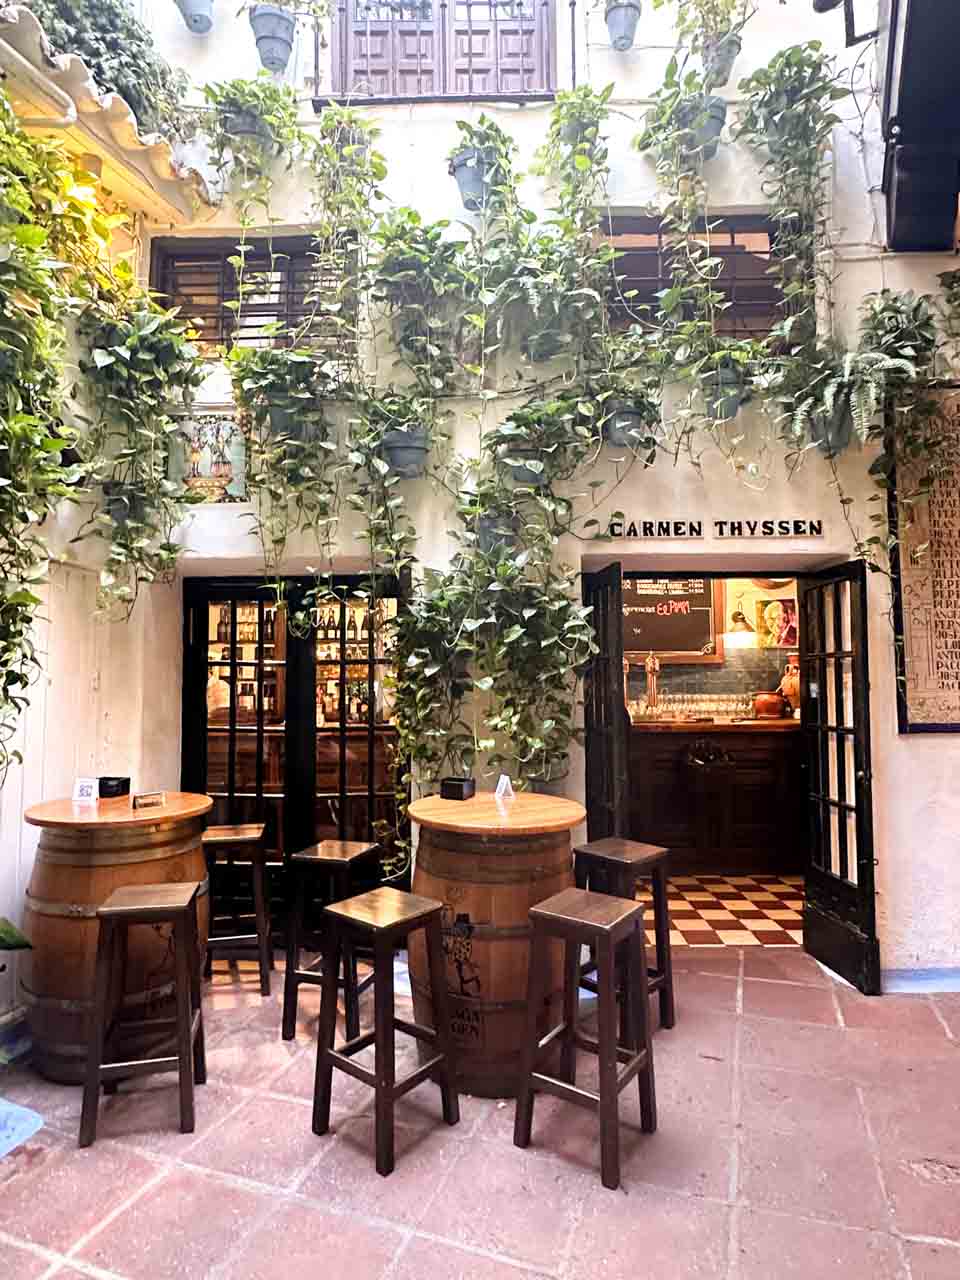 A charming courtyard of Bodega El Pimpi with wooden barrel tables and stools, surrounded by greenery and the facade of an old building